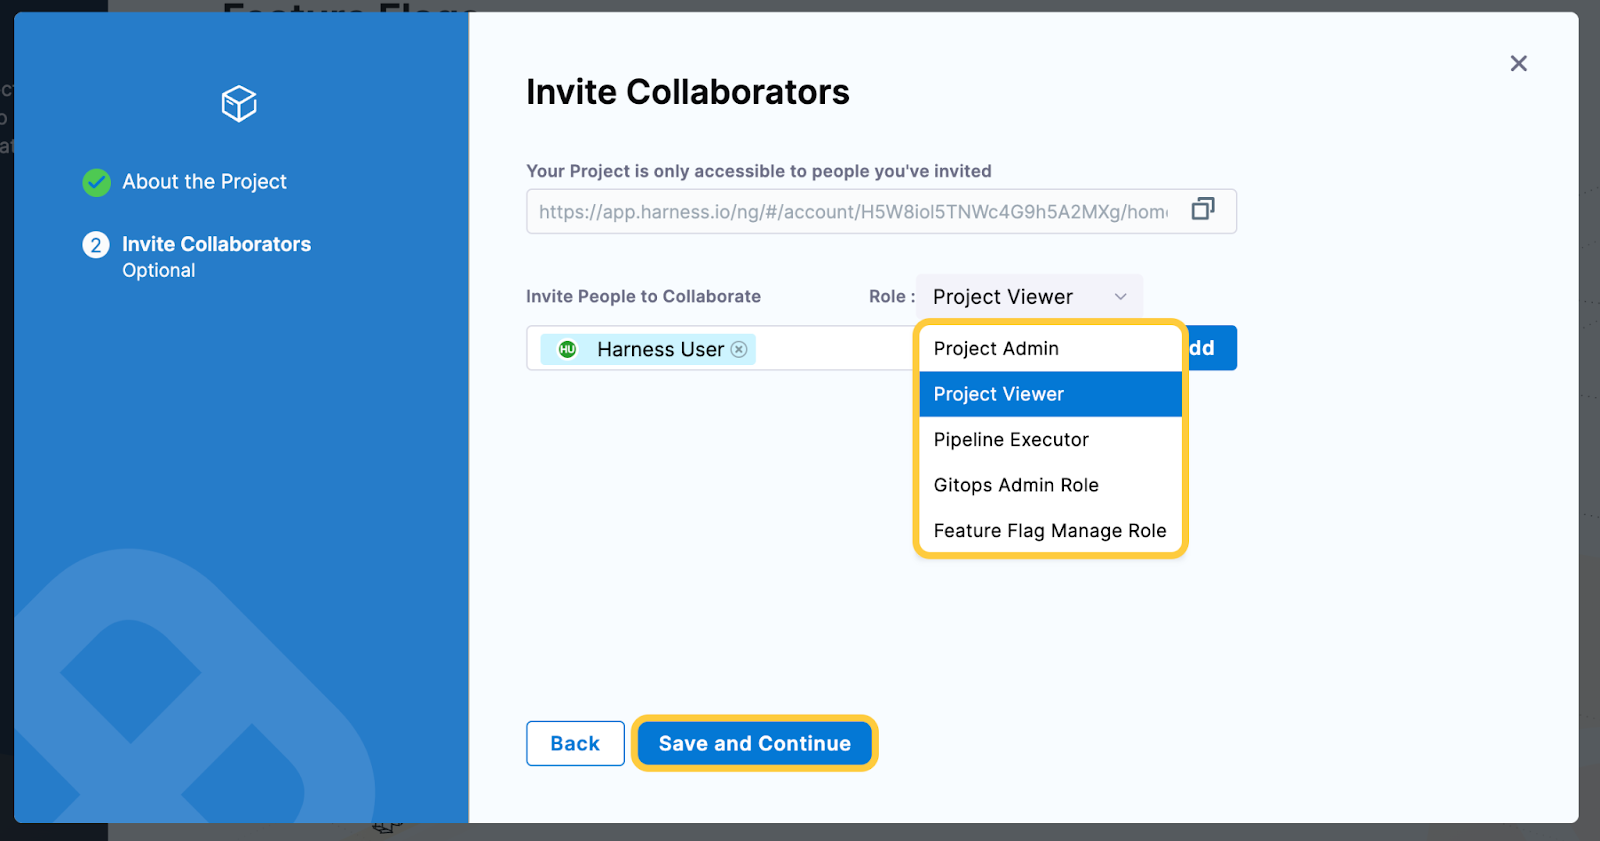 A screenshot of the Invite Collaborators form when creating a Project.